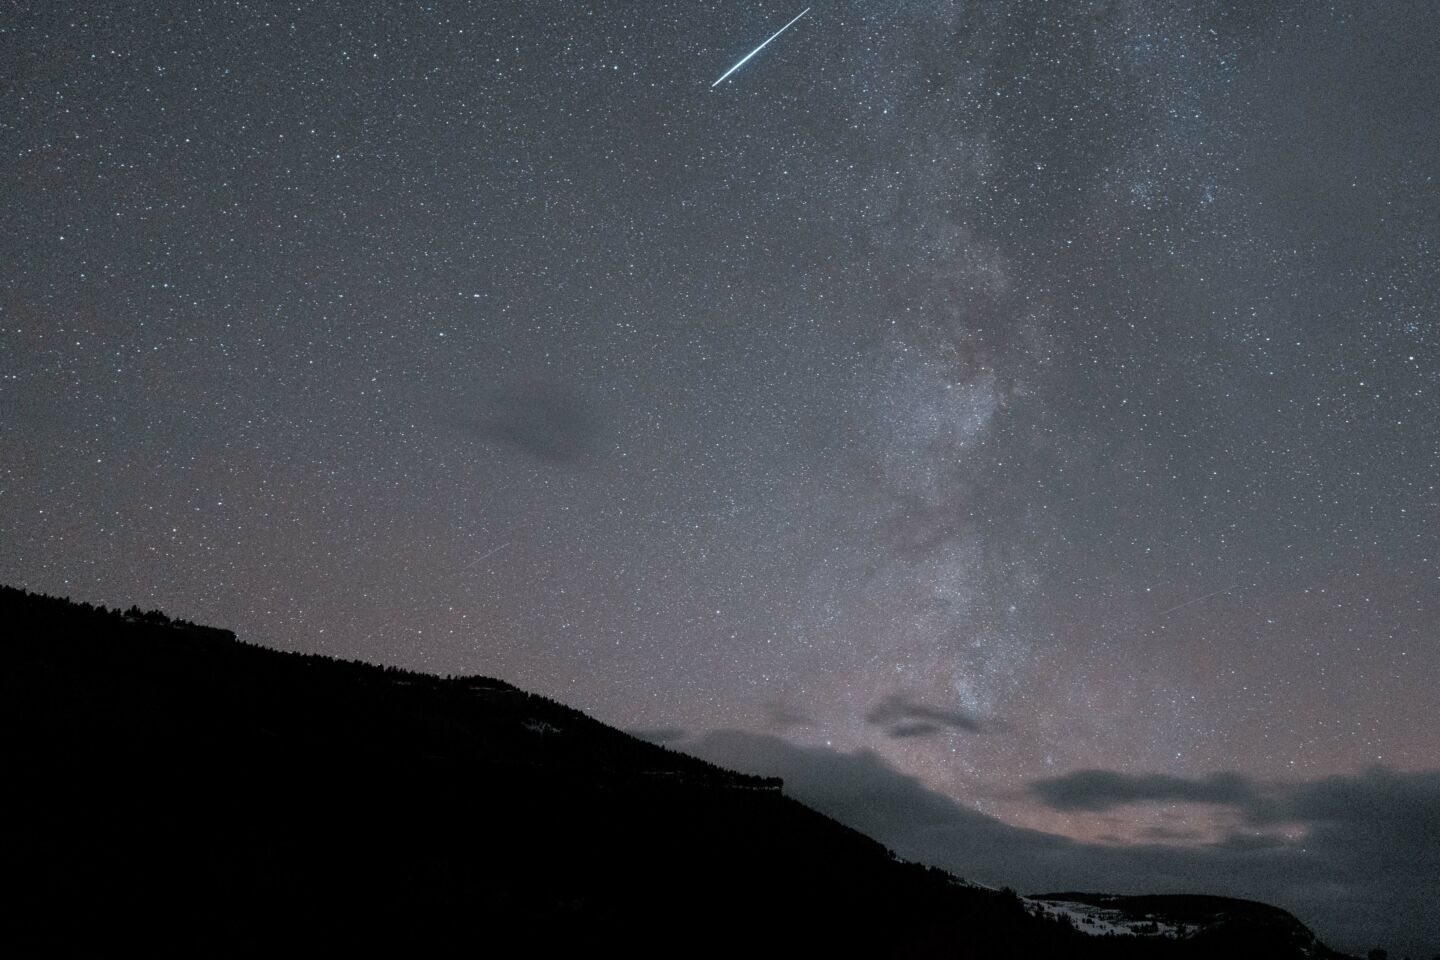 Shooting star and starry sky above a bluff in Wyoming.